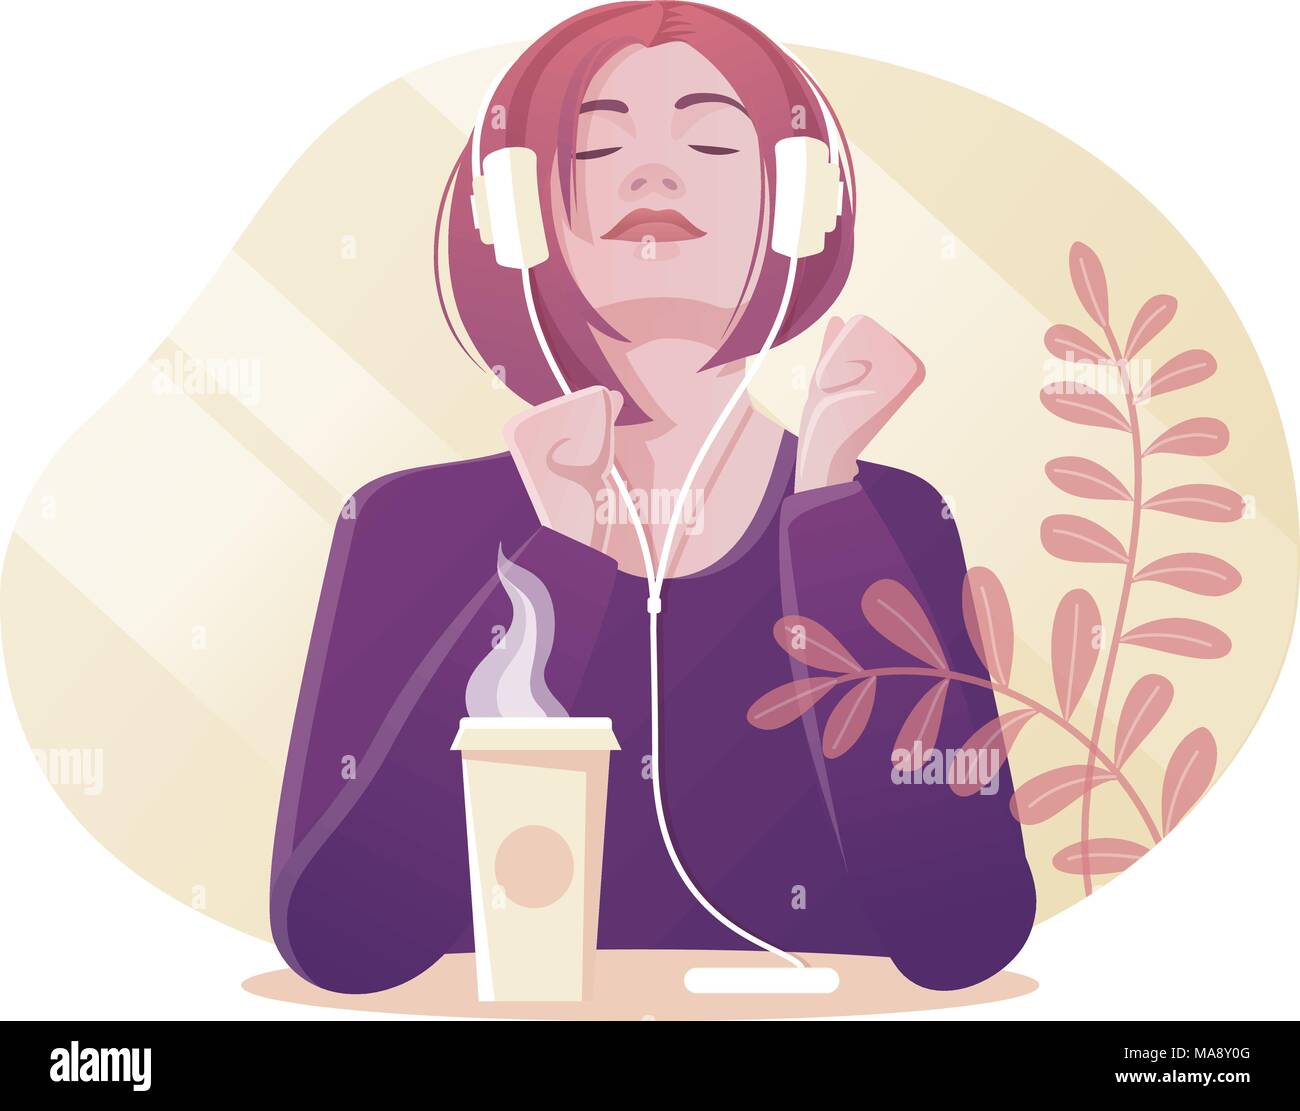 Vector illustration of young girl drinking coffee and listening music with headphones. Modern flat style. Stock Vector